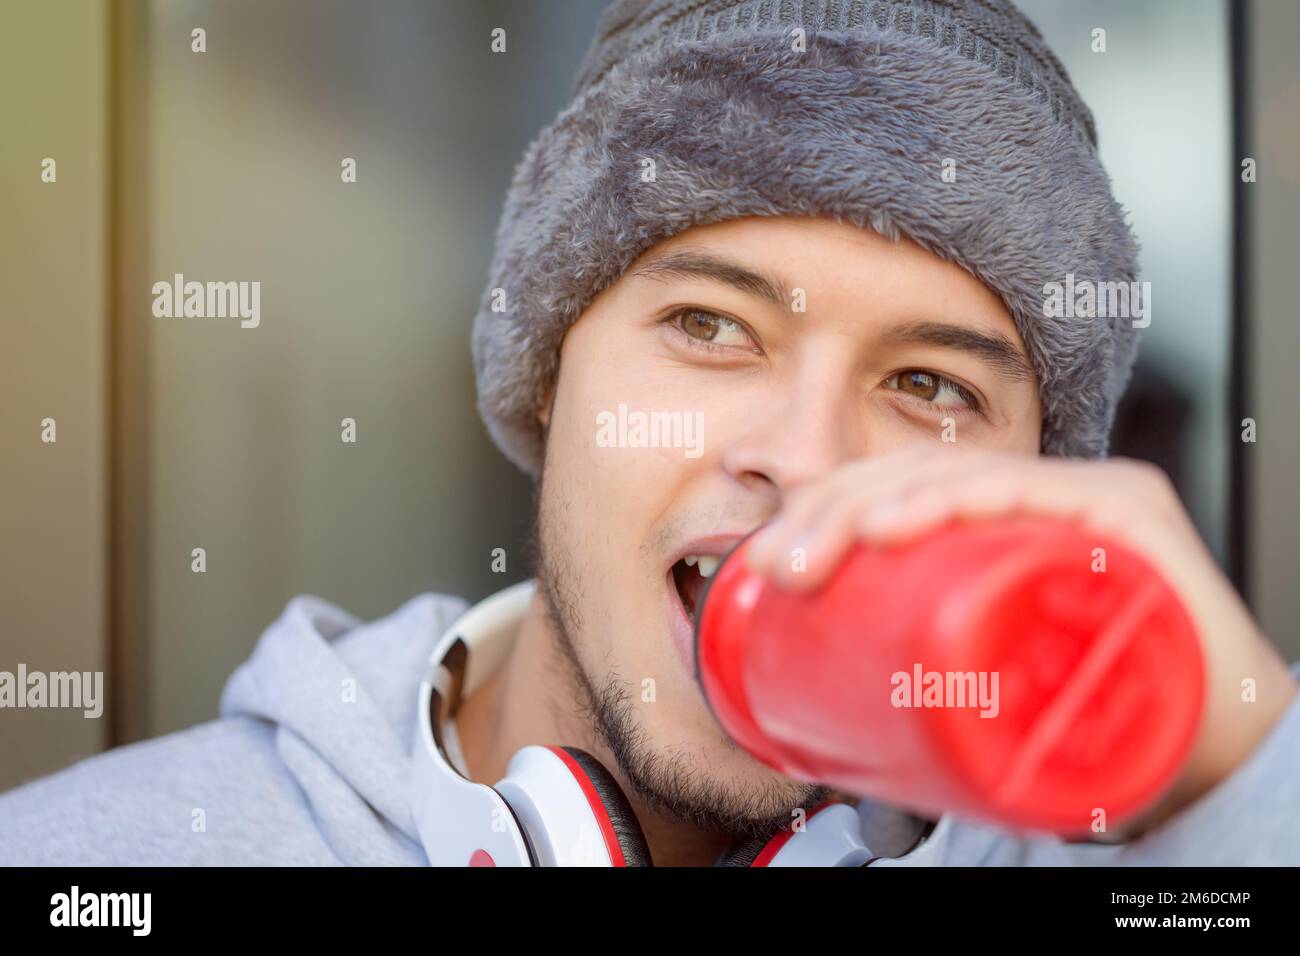 Sports training fitness young latin man drinking copyspace copy space winter running jogging Stock Photo